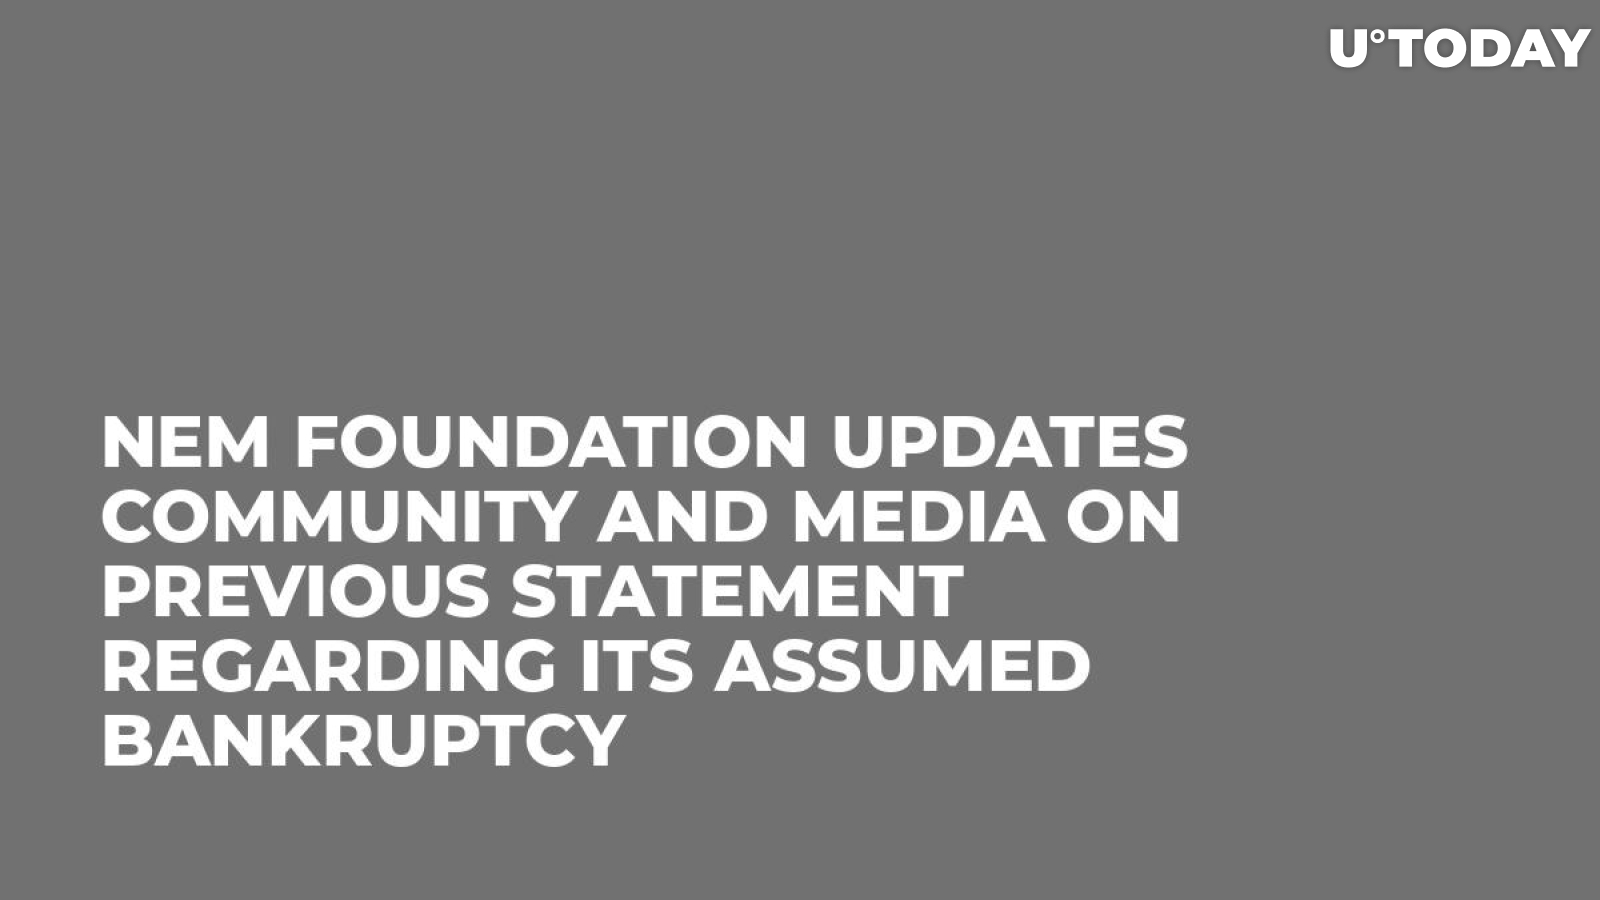 NEM Foundation Updates Community and Media on Previous Statement Regarding Its Assumed Bankruptcy